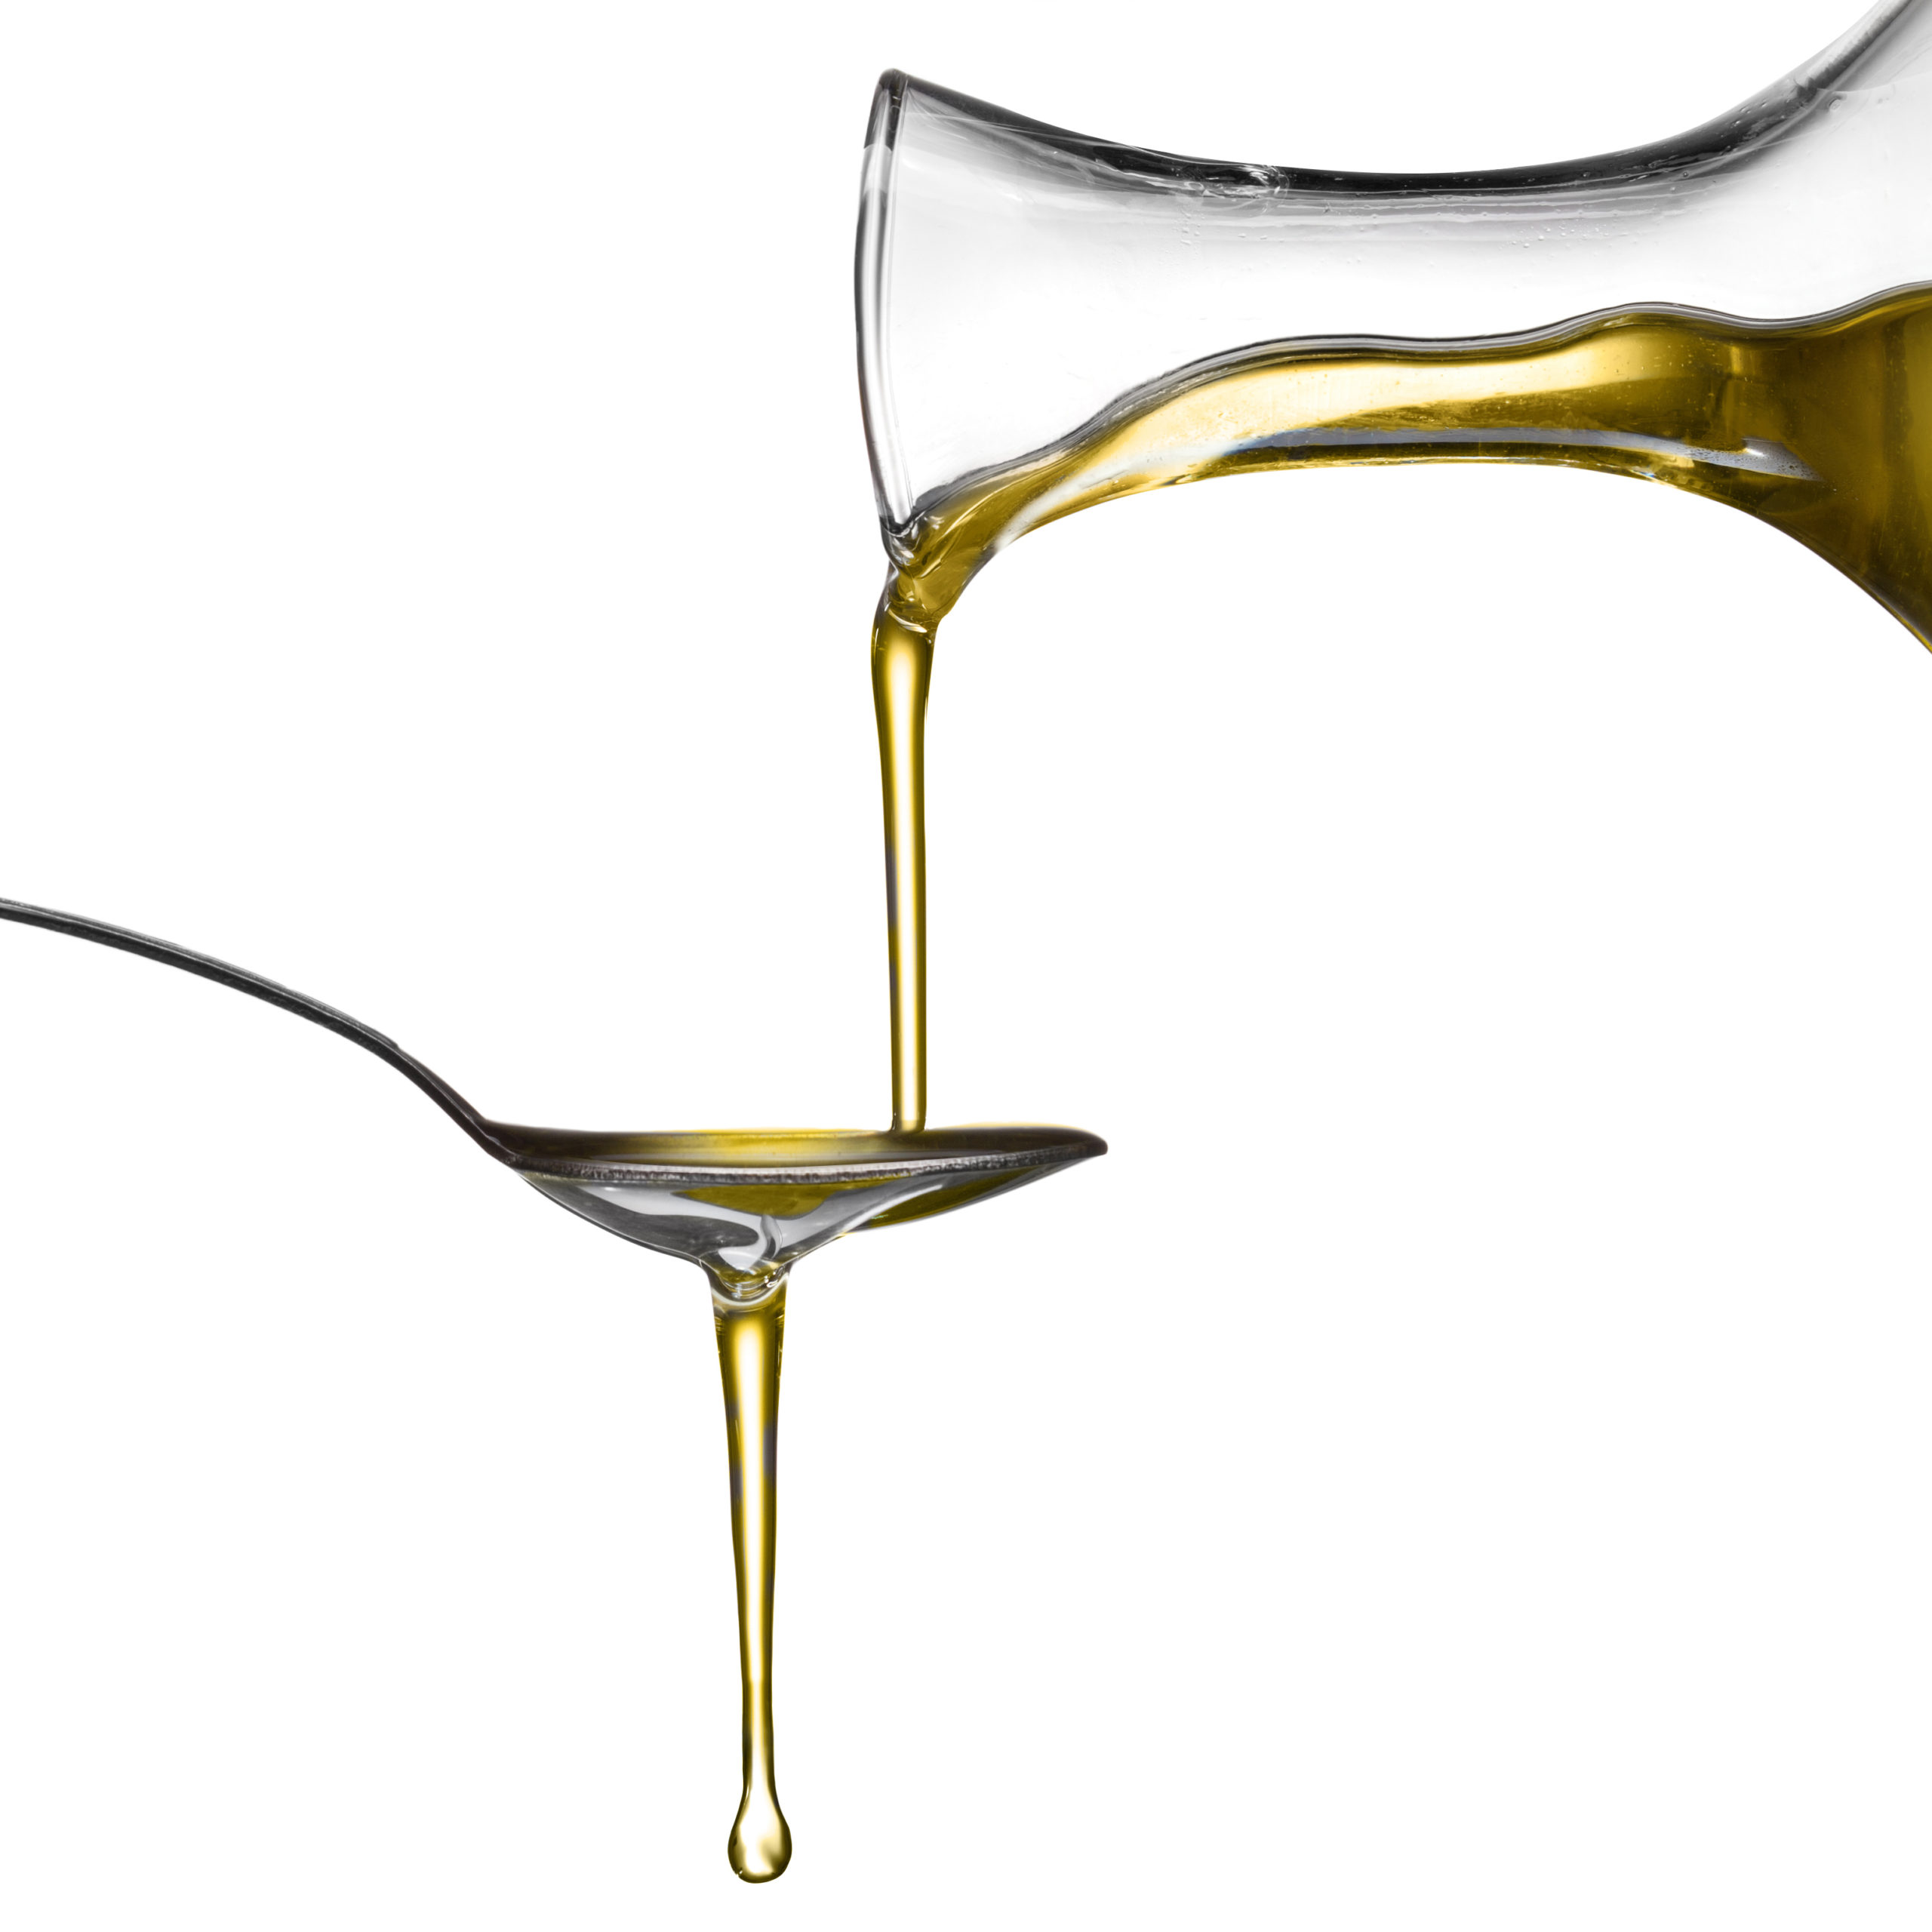 olive oil being poured on a spoon